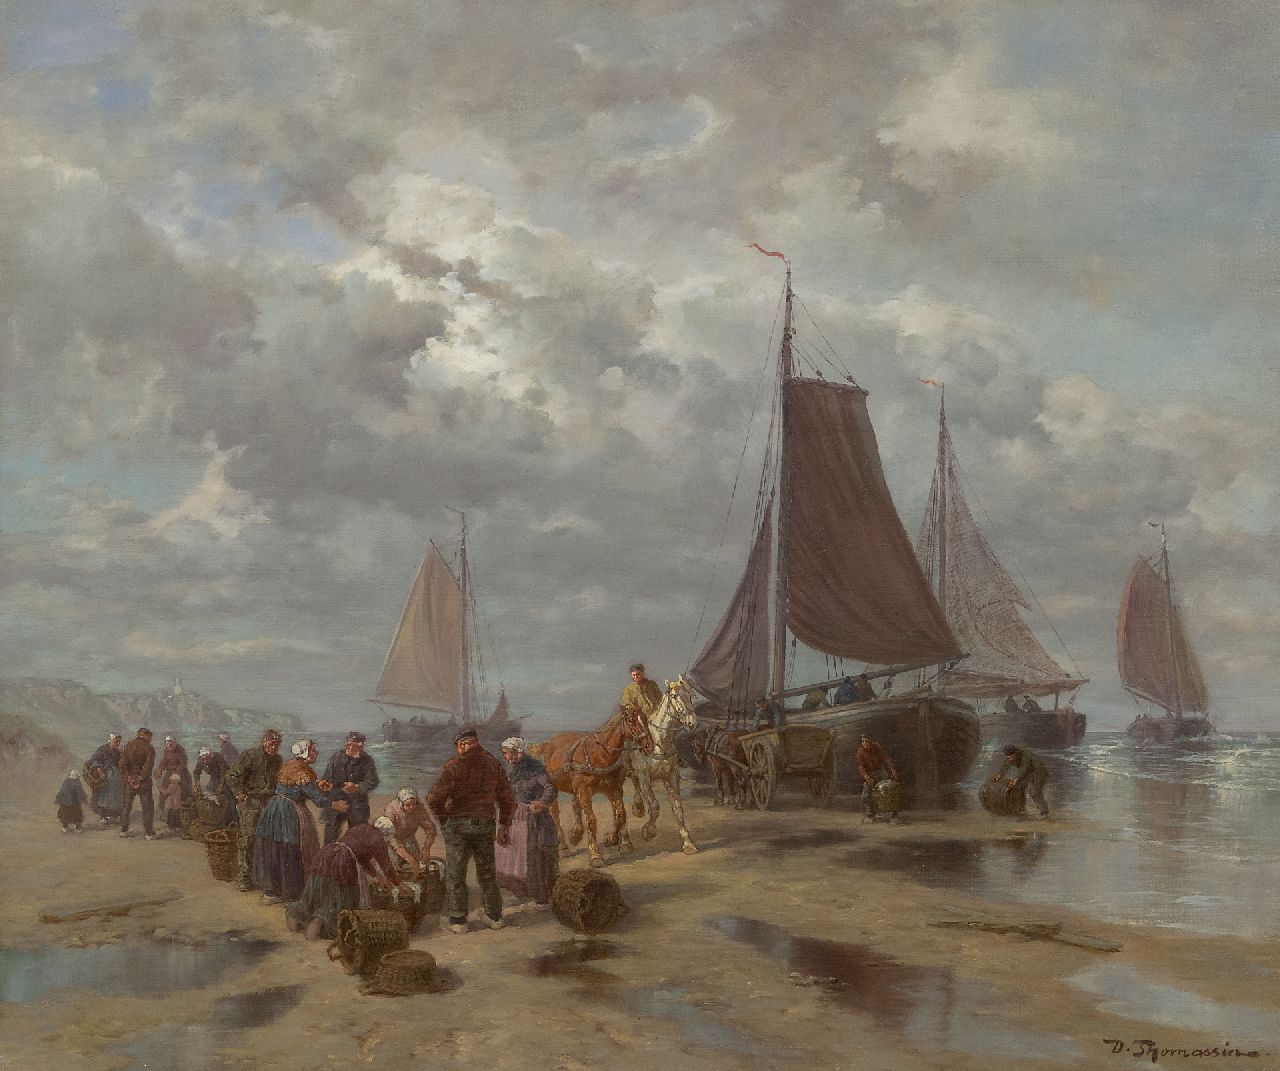 Désiré Thomassin | Selling fish on the beach, oil on canvas, 50.5 x 60.5 cm, signed l.r.